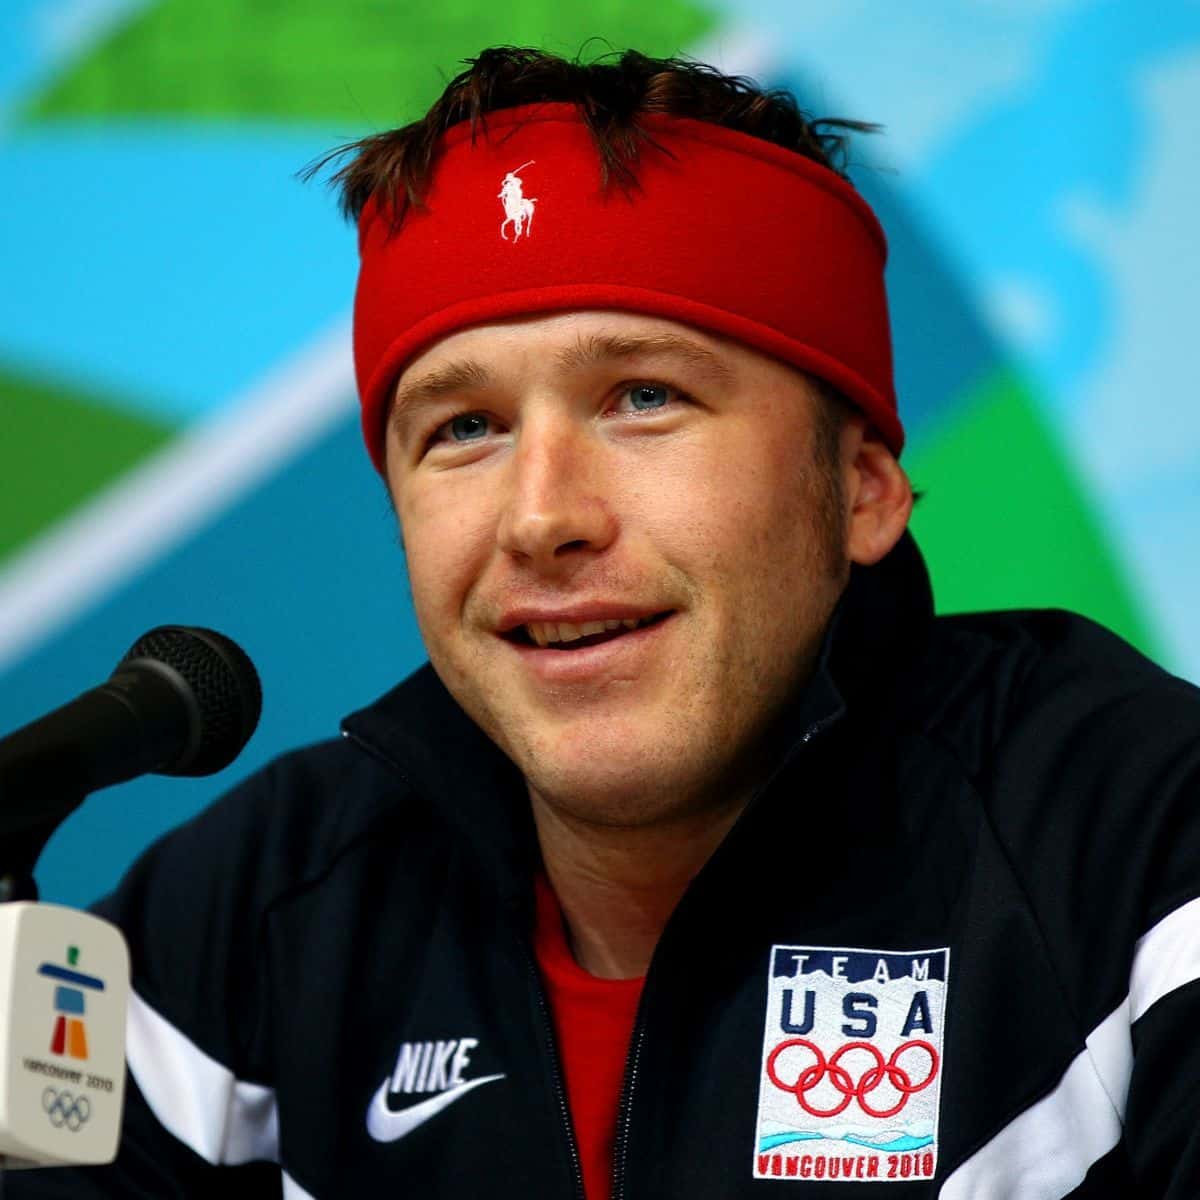 what is the net worth of Bode Miller